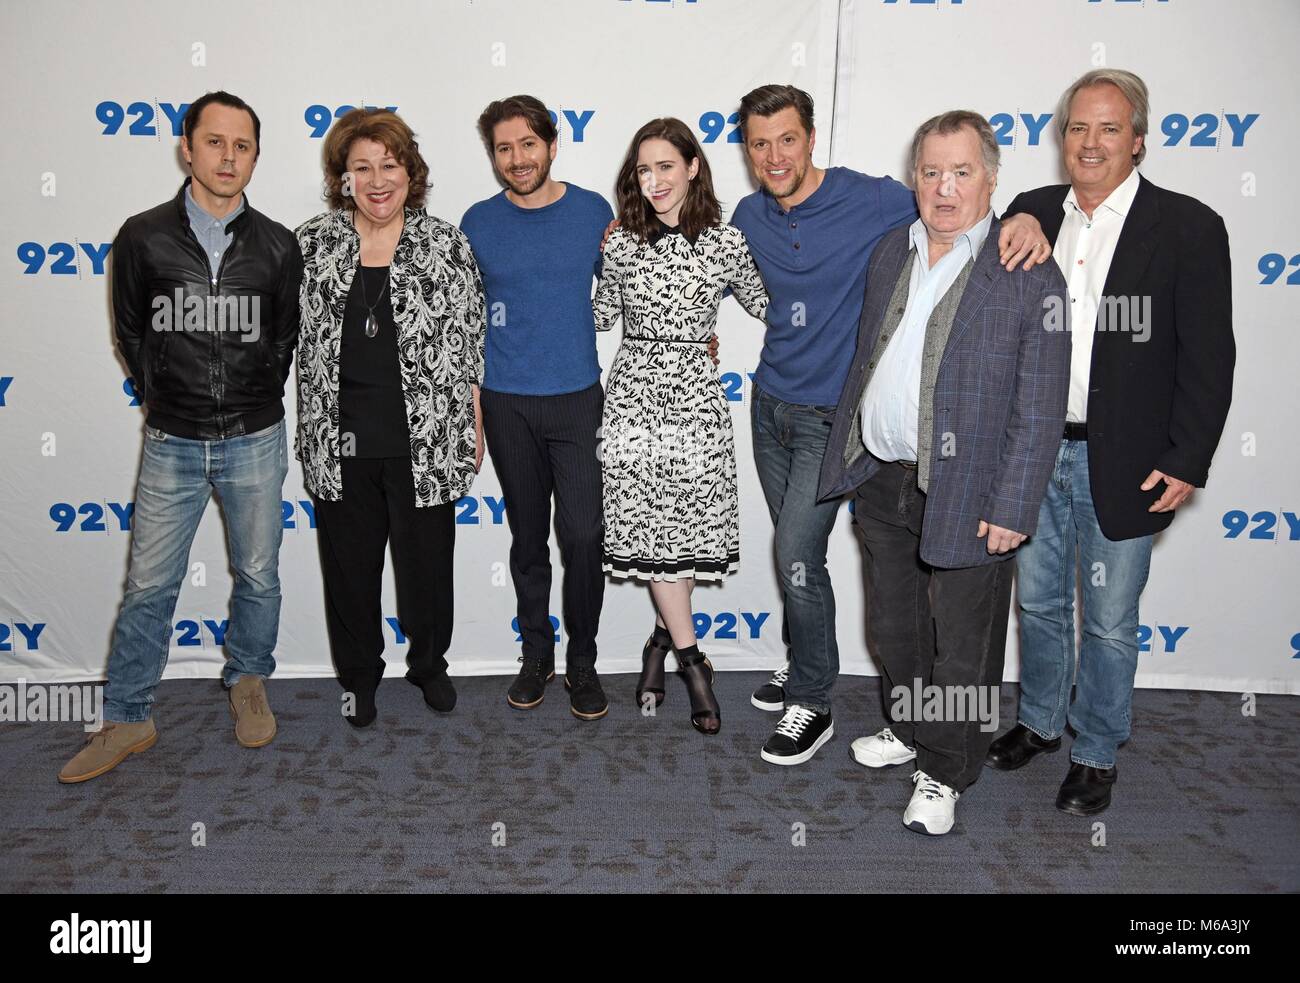 New York, NY, USA. 1st Mar, 2018. Giovanni Ribisi, Margo Martindale, Michael Zegen, Rachel Brosnahan, Shane McRae, Peter Gerety, Graham Yost at arrivals for SNEAKY PETE and THE MARVELOUS MRS. MAISEL Casts Appearance, 92nd Street Y, New York, NY March 1, 2018. Credit: Derek Storm/Everett Collection/Alamy Live News Stock Photo